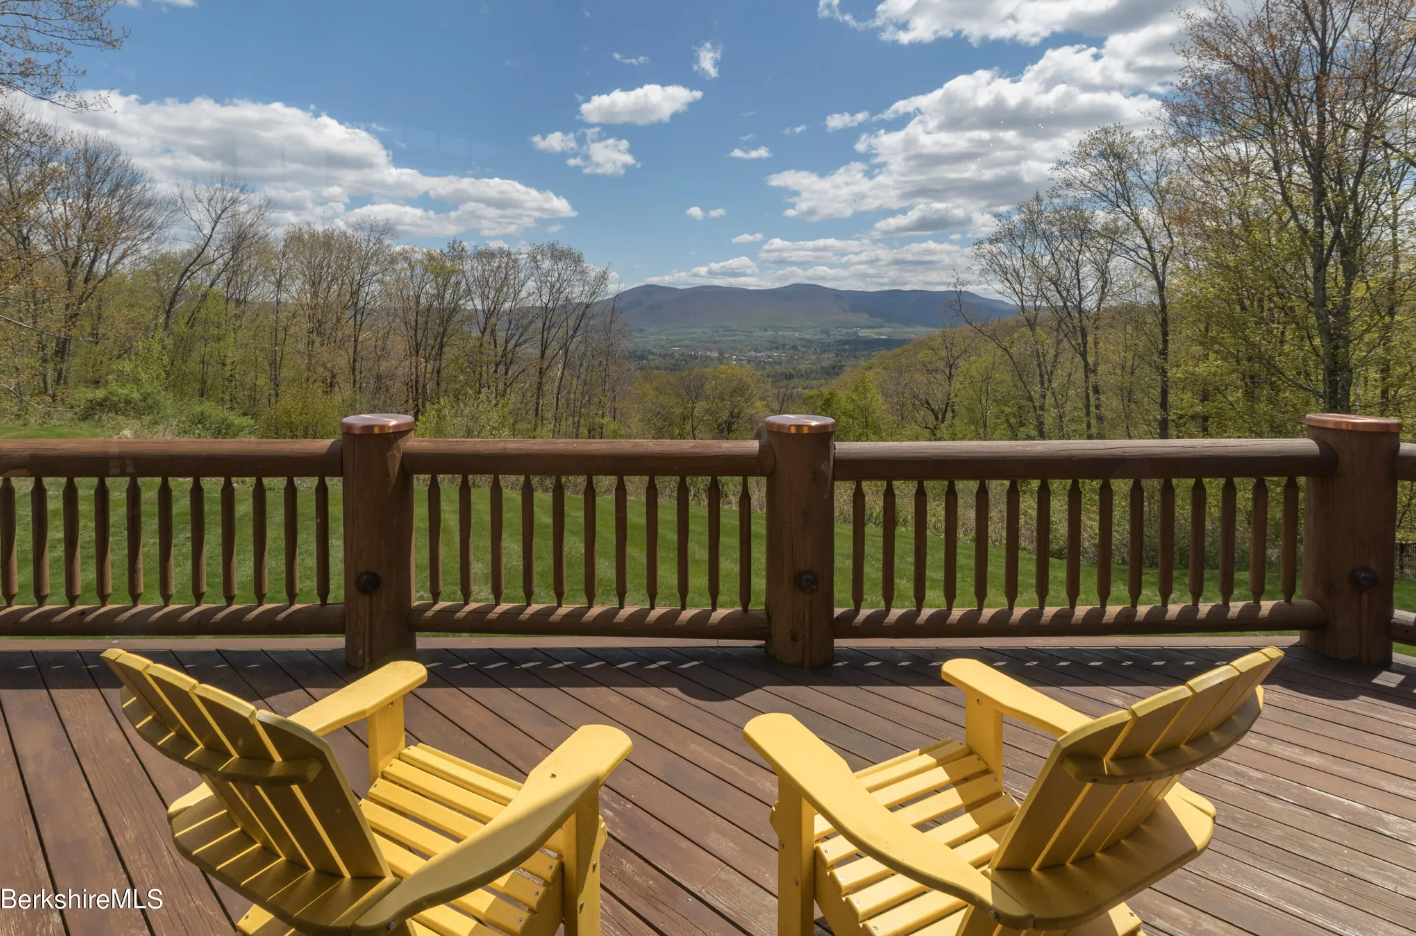 Yellow Adirondack chairs on a deck overlooking the mountains.